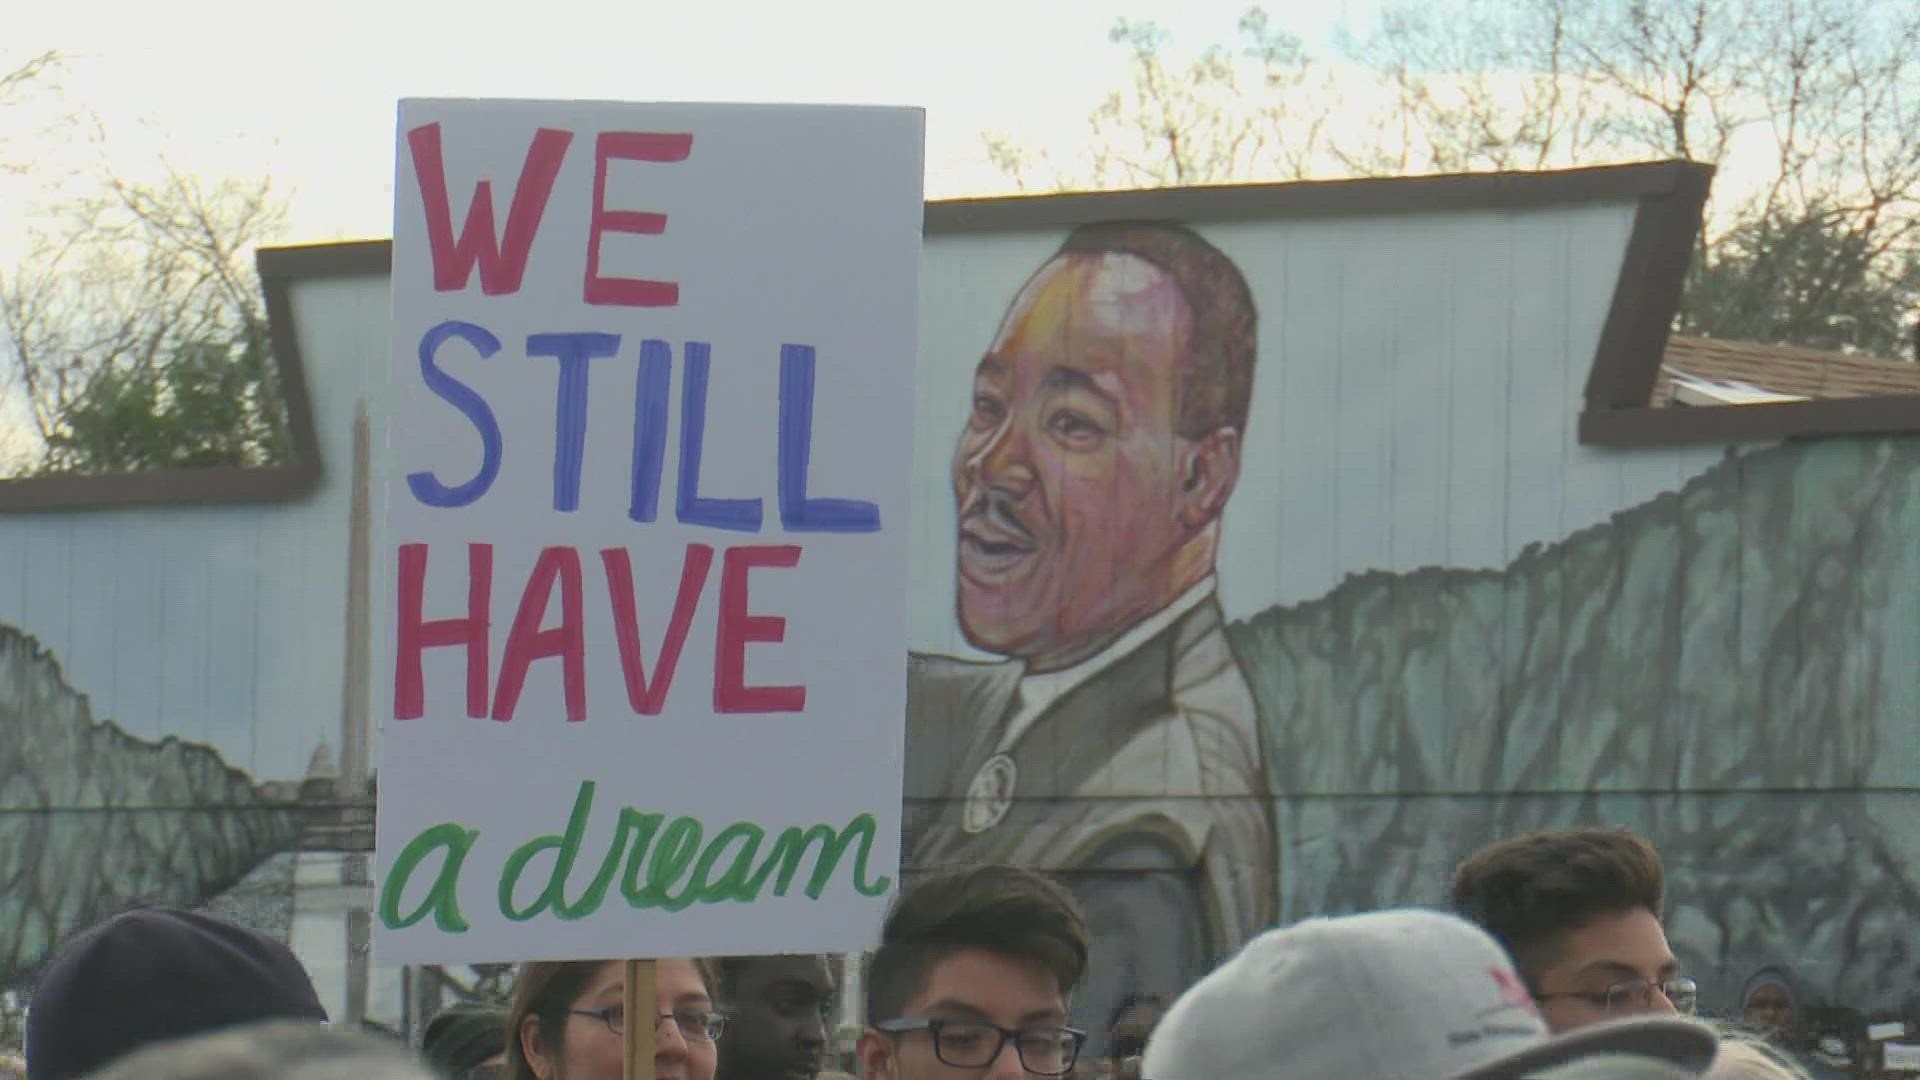 The MLK March is expected to be the largest in San Antonio’s history. The Commission also offers scholarships and numerous events leading up to the march.